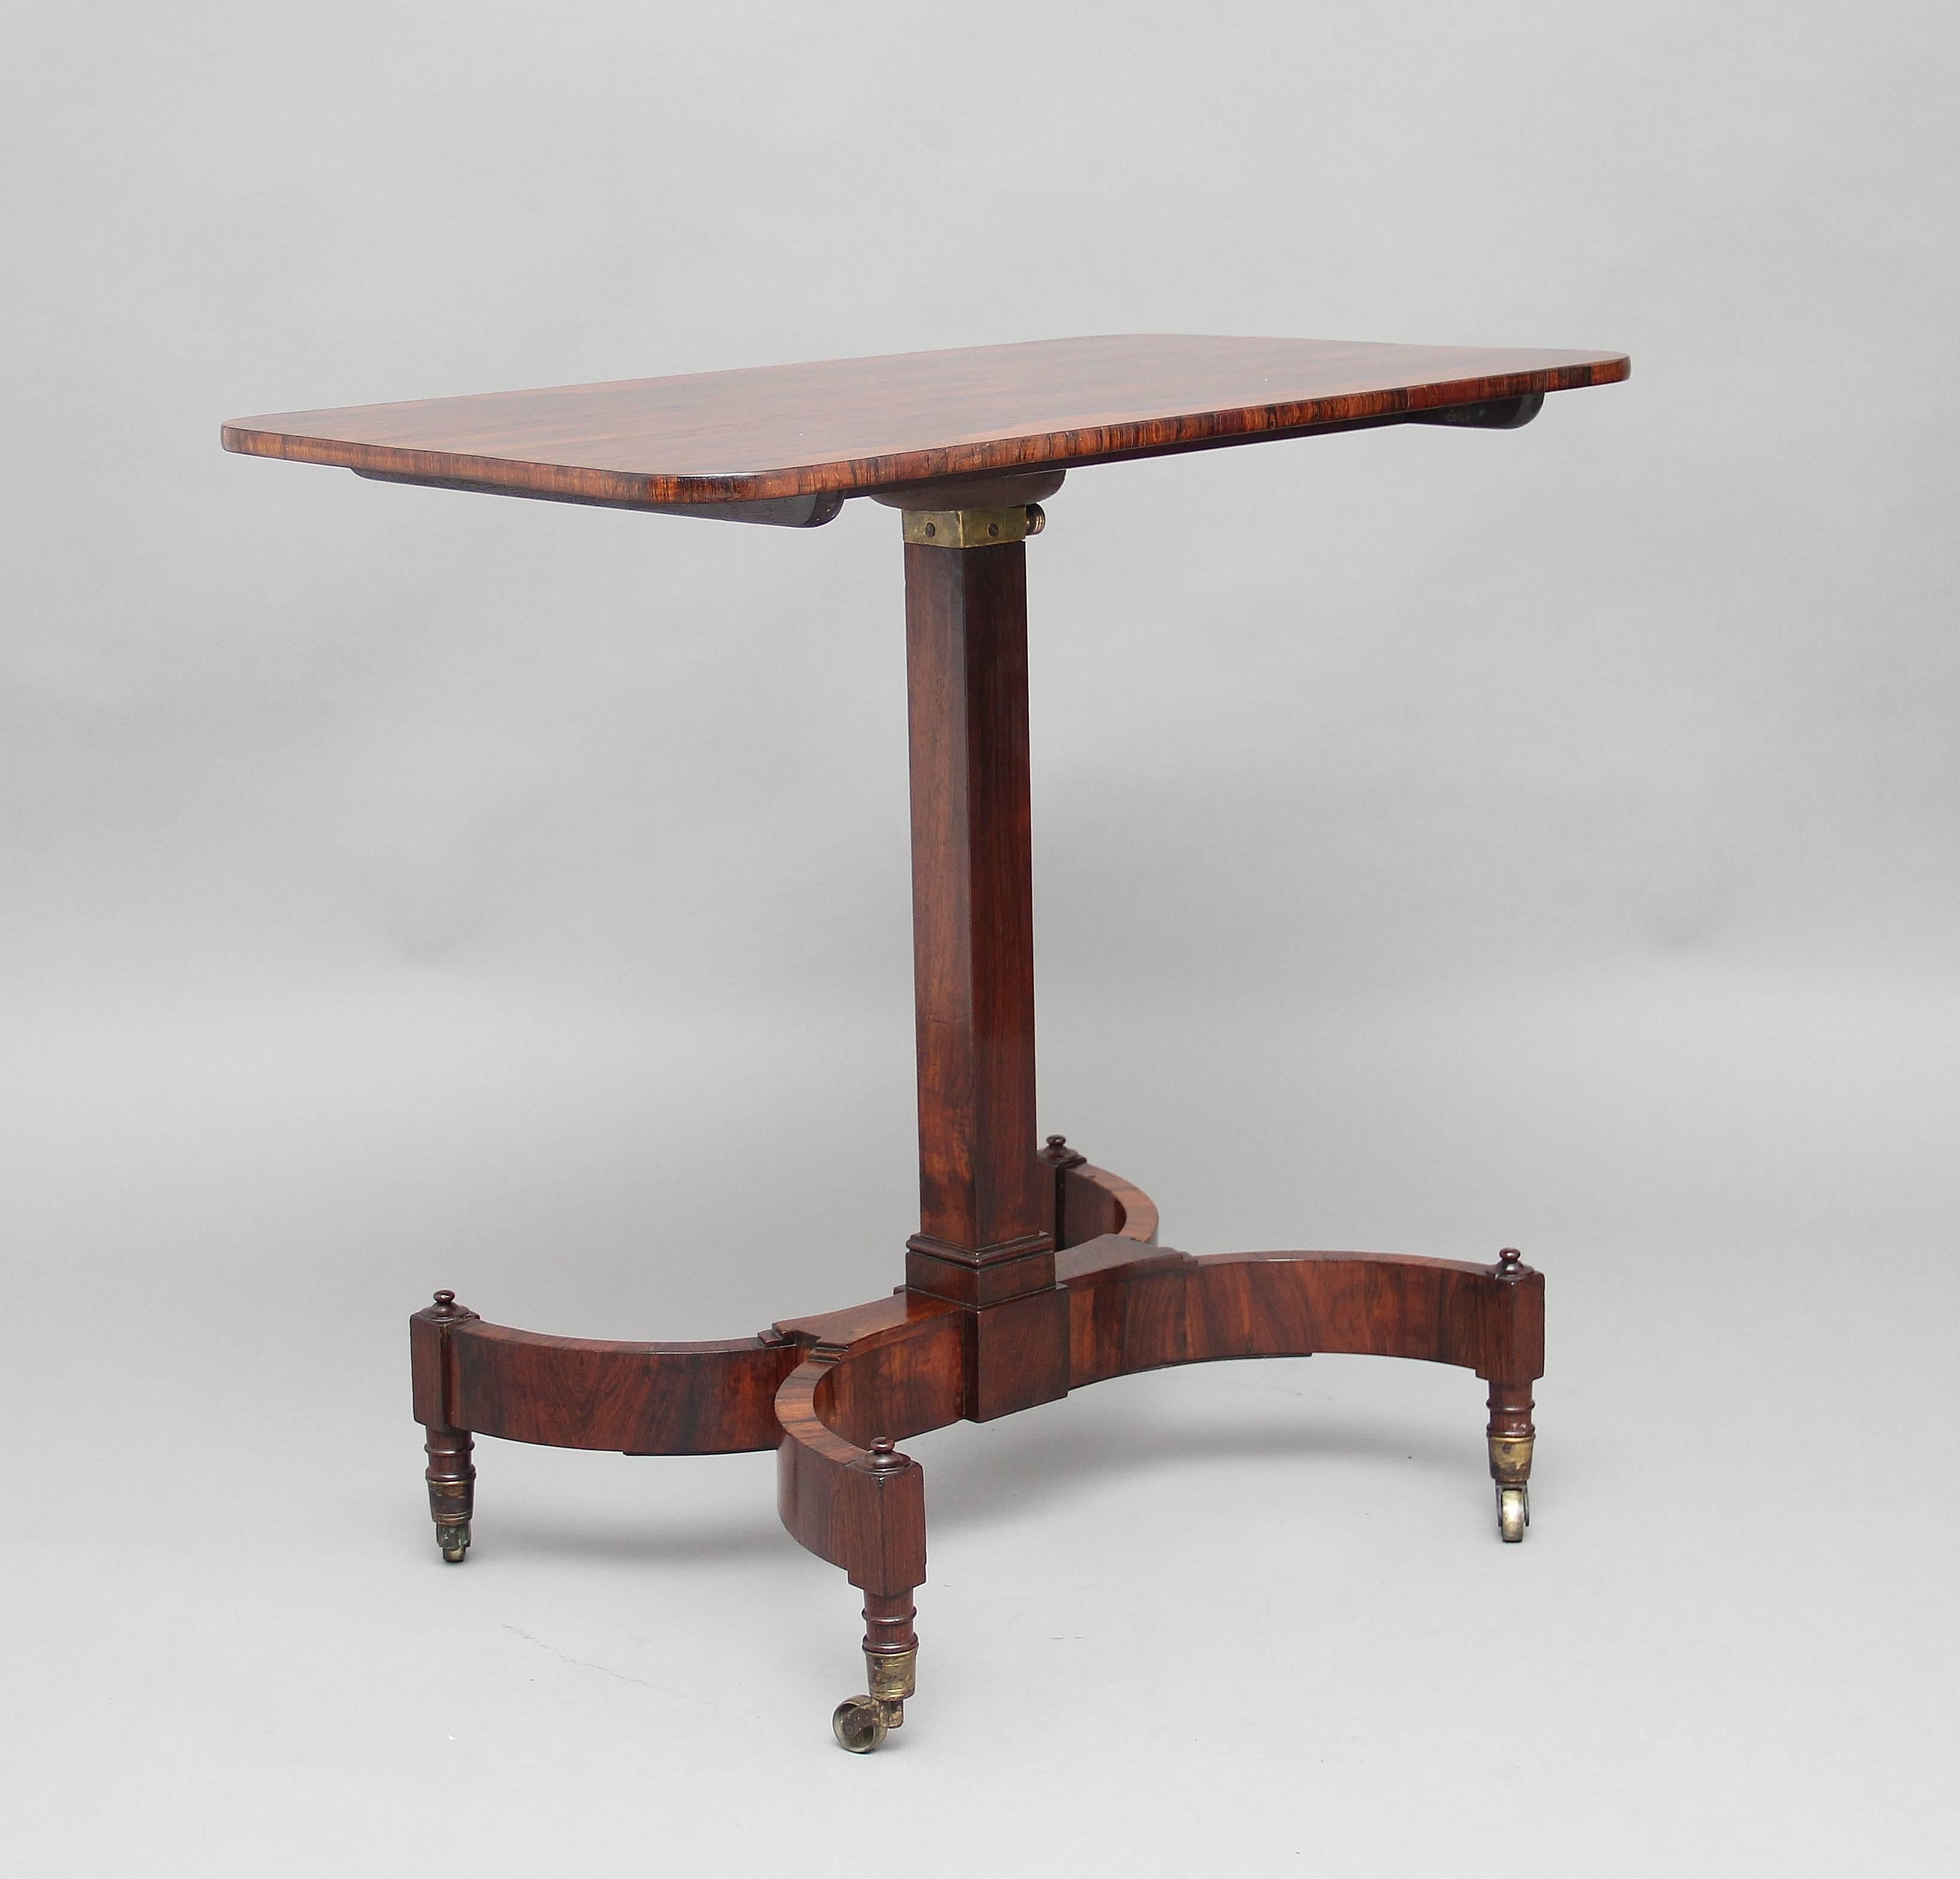 19th century Regency rosewood adjustable table, the rectangular top as well as being able to slide it has a rise and fall mechanism, supported on a square column ending on a shaped and swept base terminating with brass cap and castors, circa 1820.
 